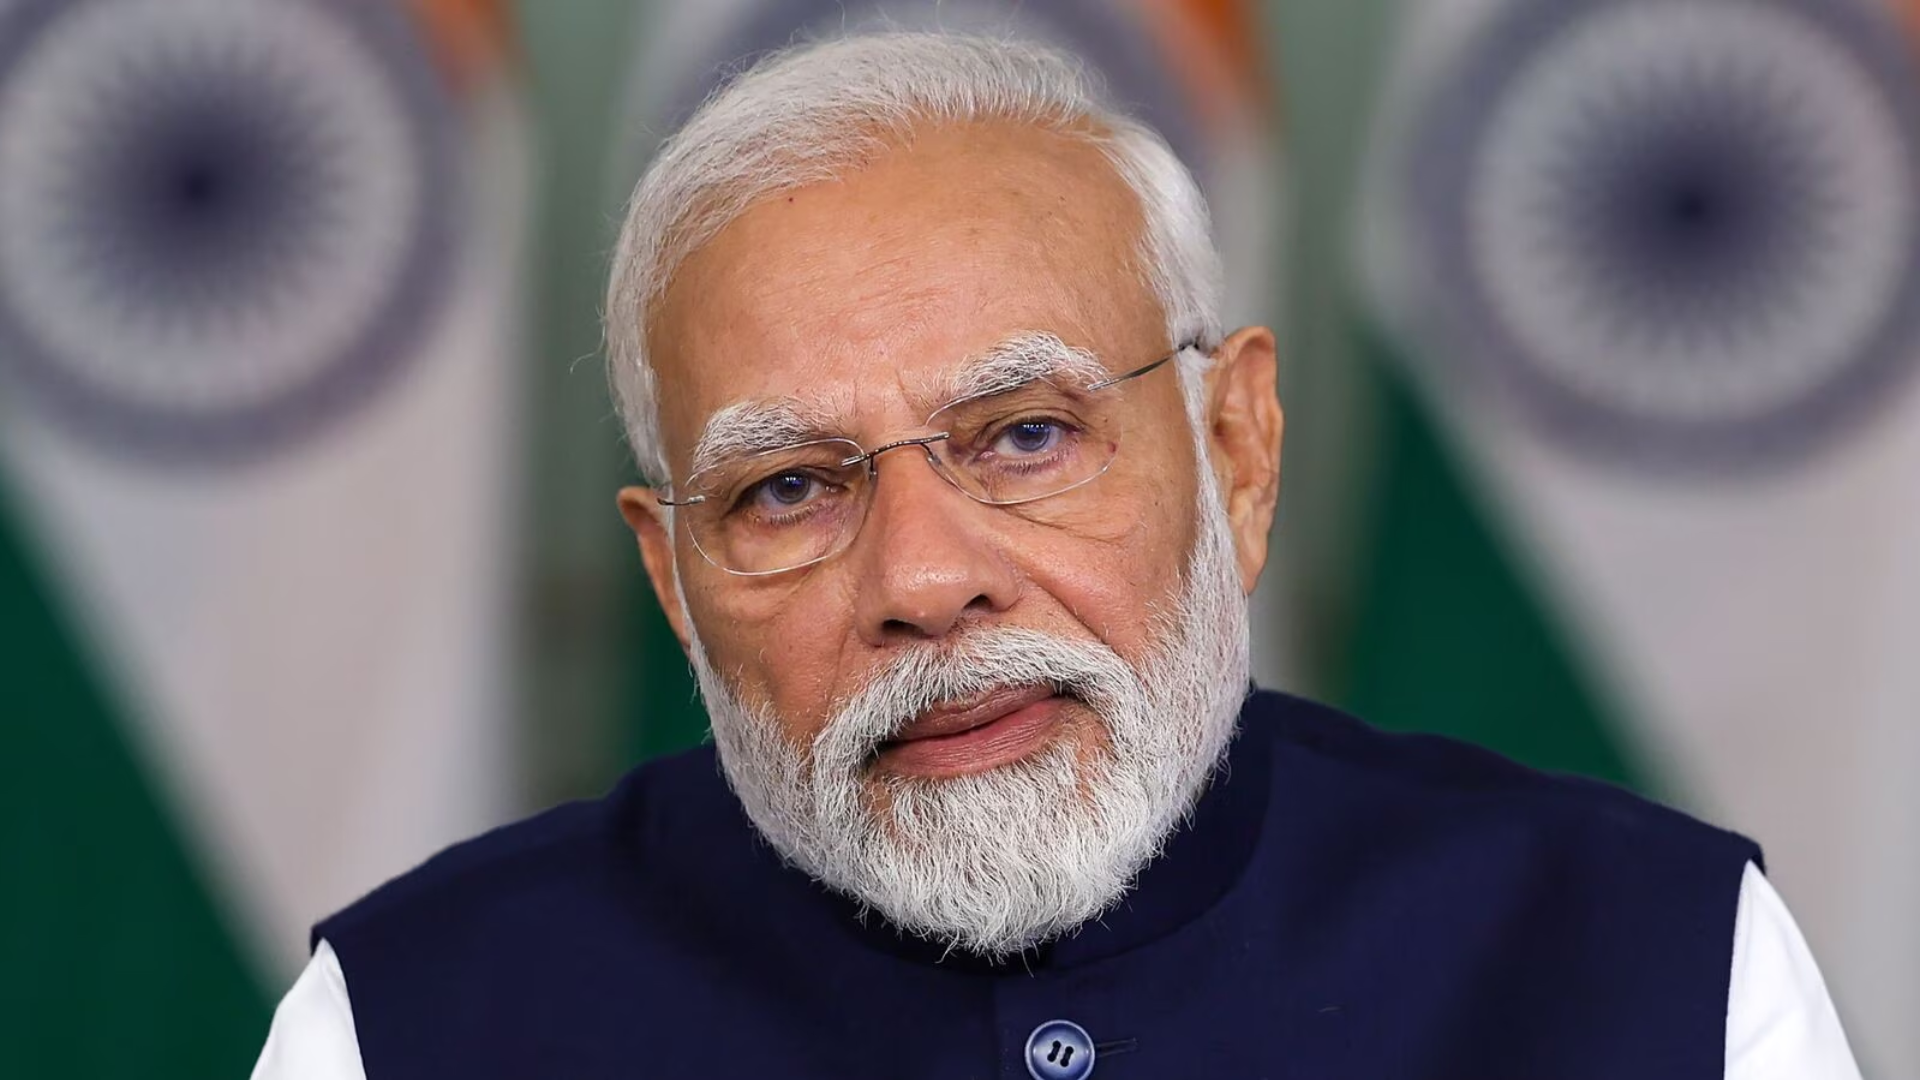 Inheritance tax has never removed poverty, says PM Modi